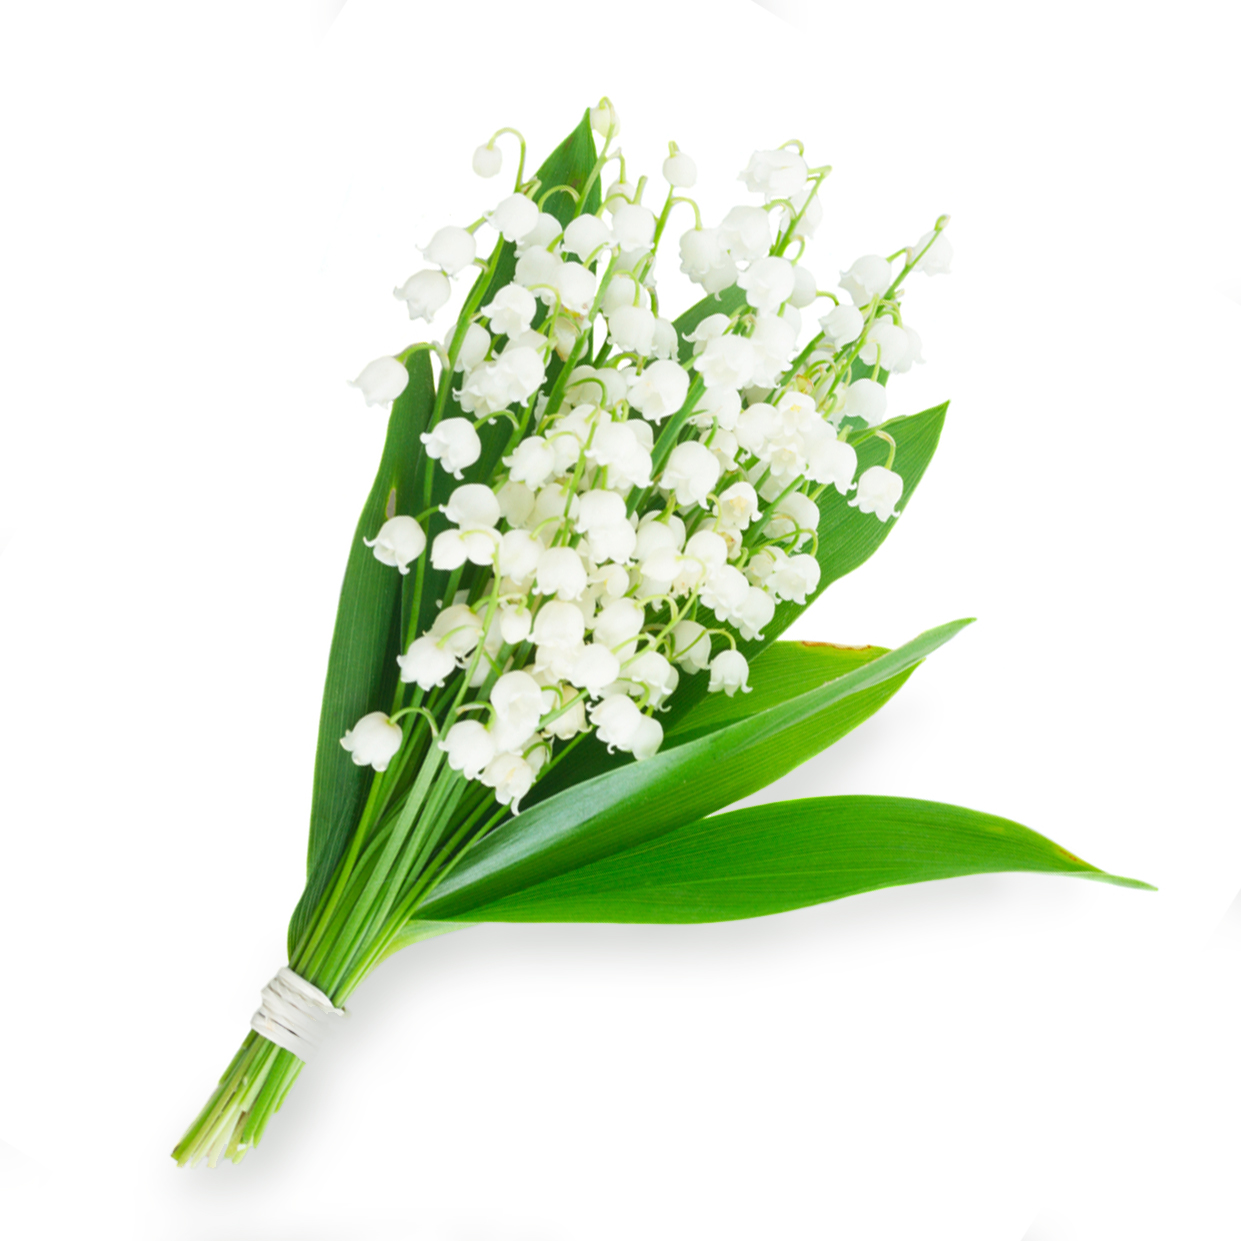 LILY OF THE VALLEY - sent on February 10th, 2021